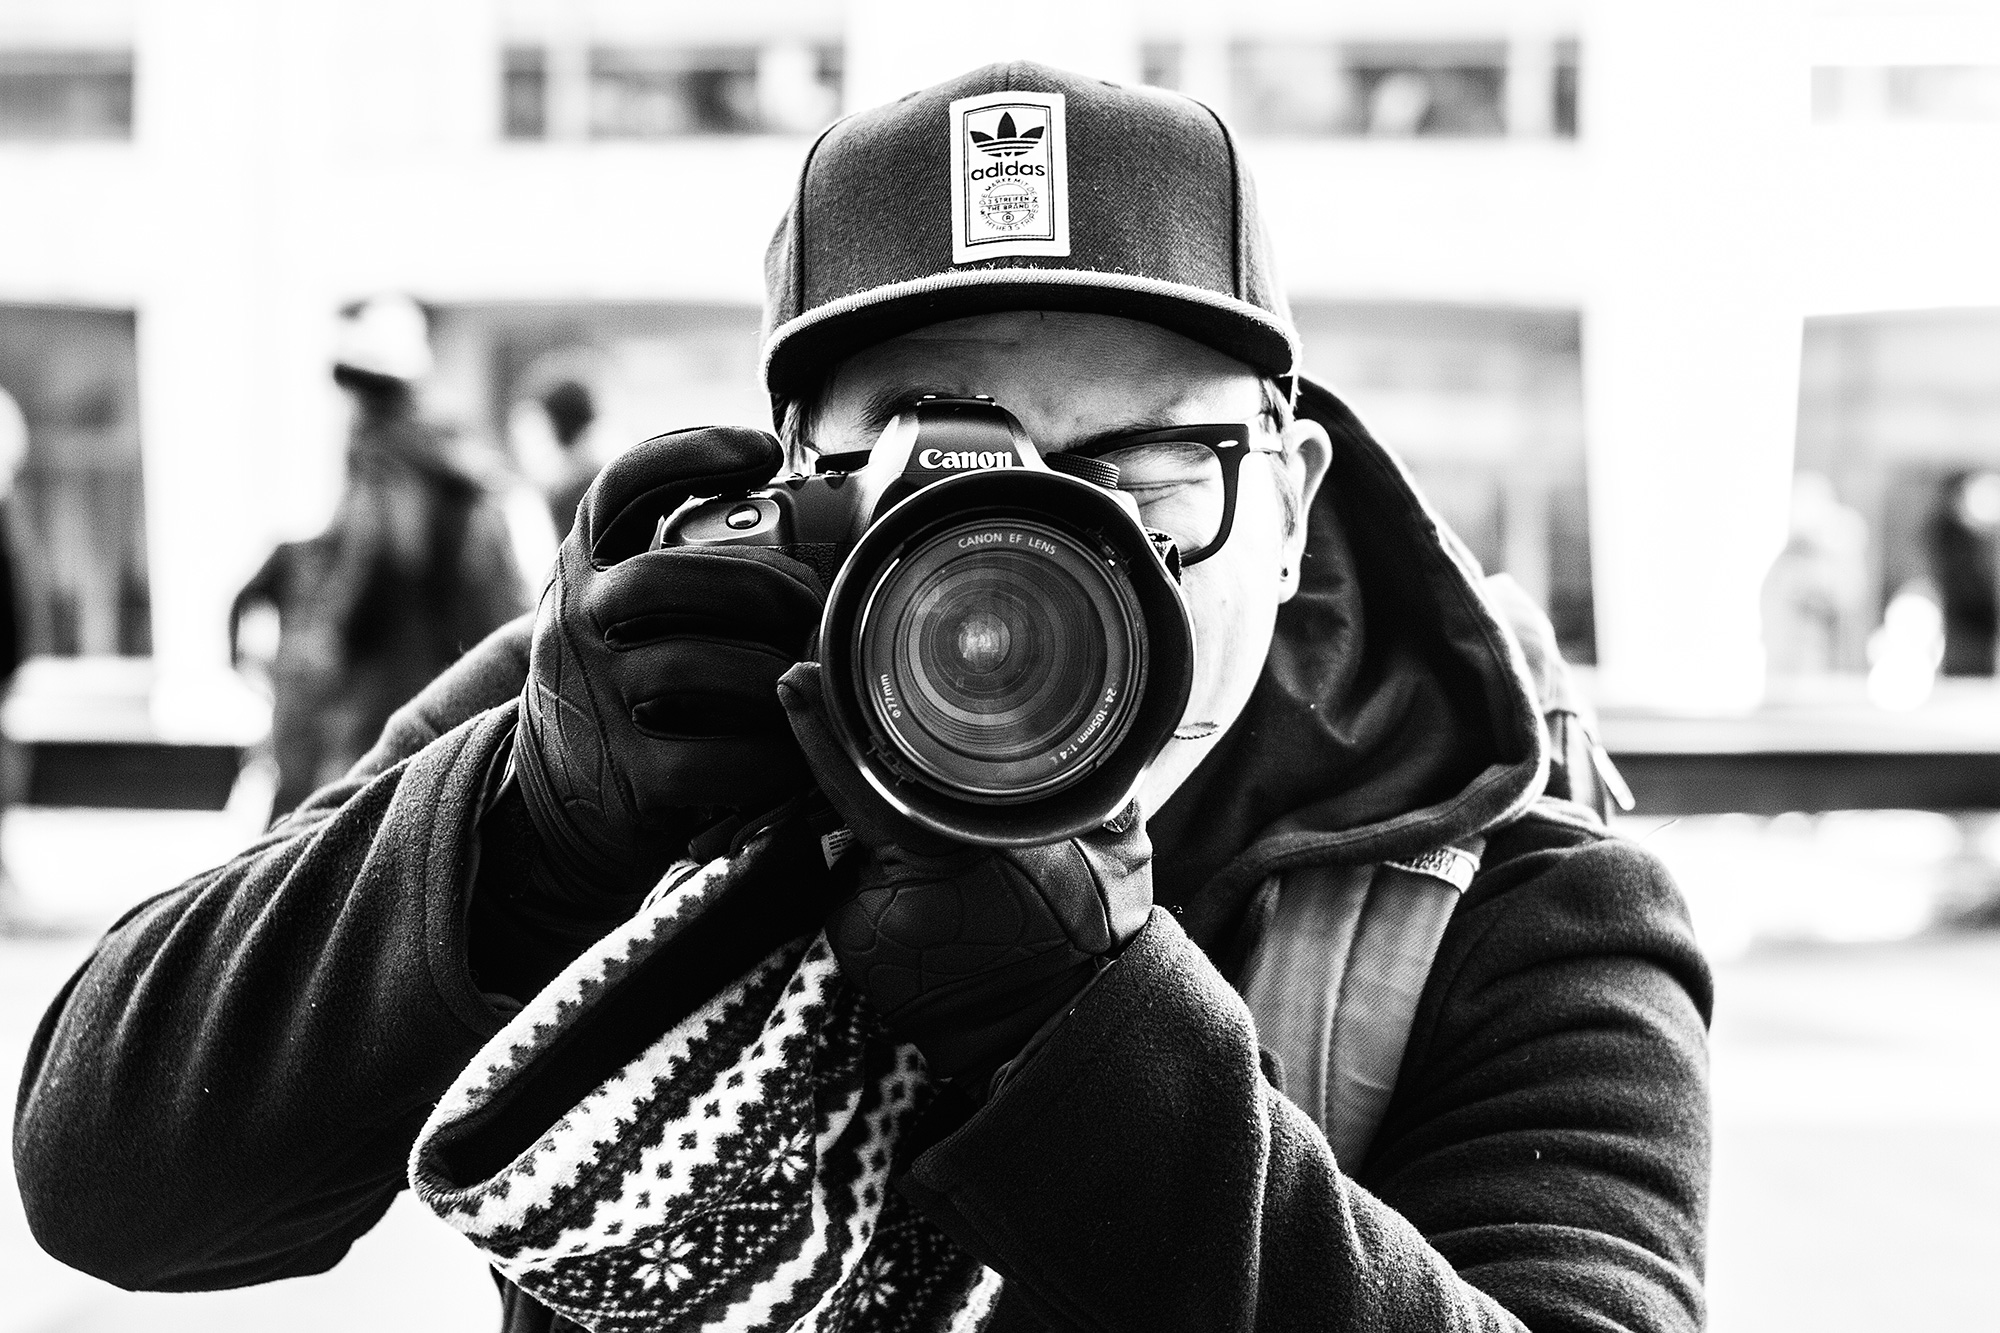  Meet the Street-Style Photographers Who Comb the City During Fashion Week  February 2015   BLOOMBERG.COM  